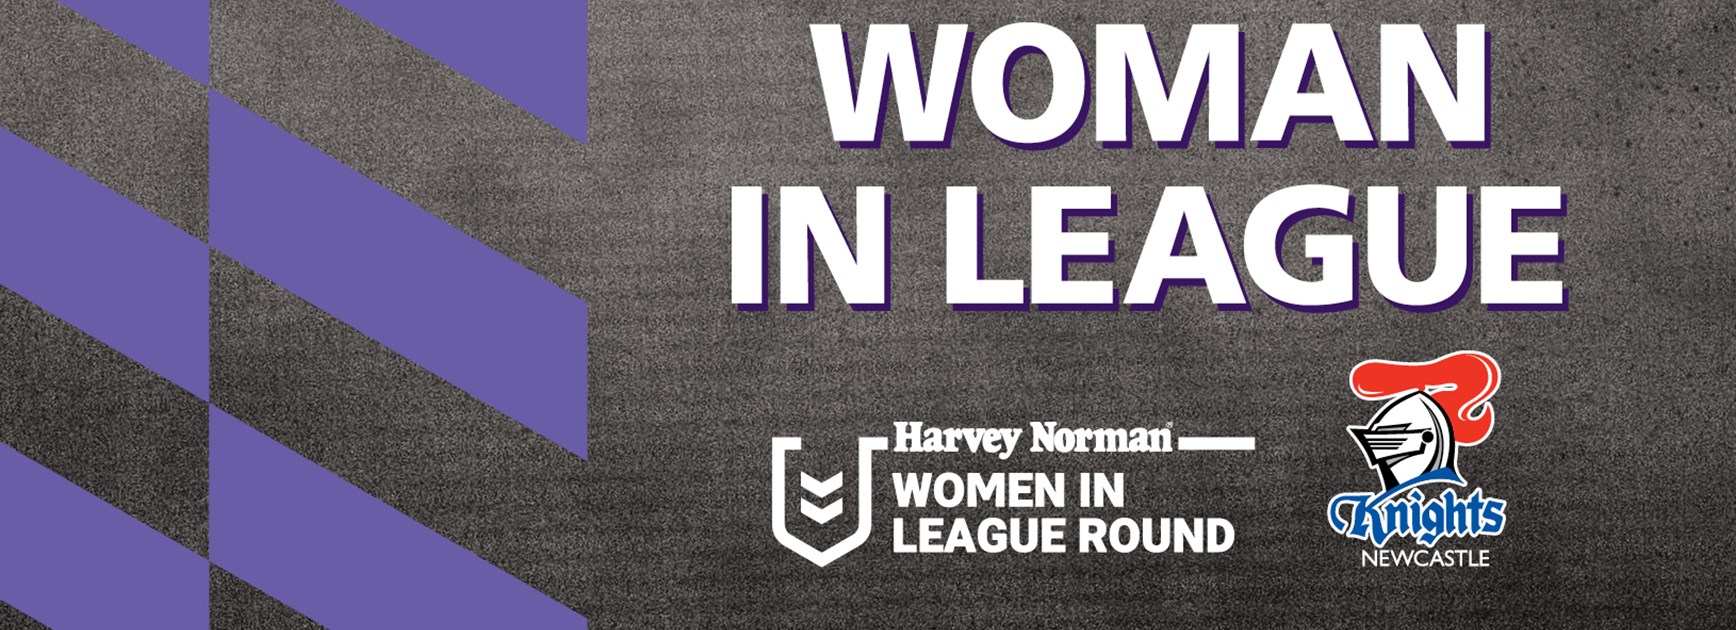 Women in League competition